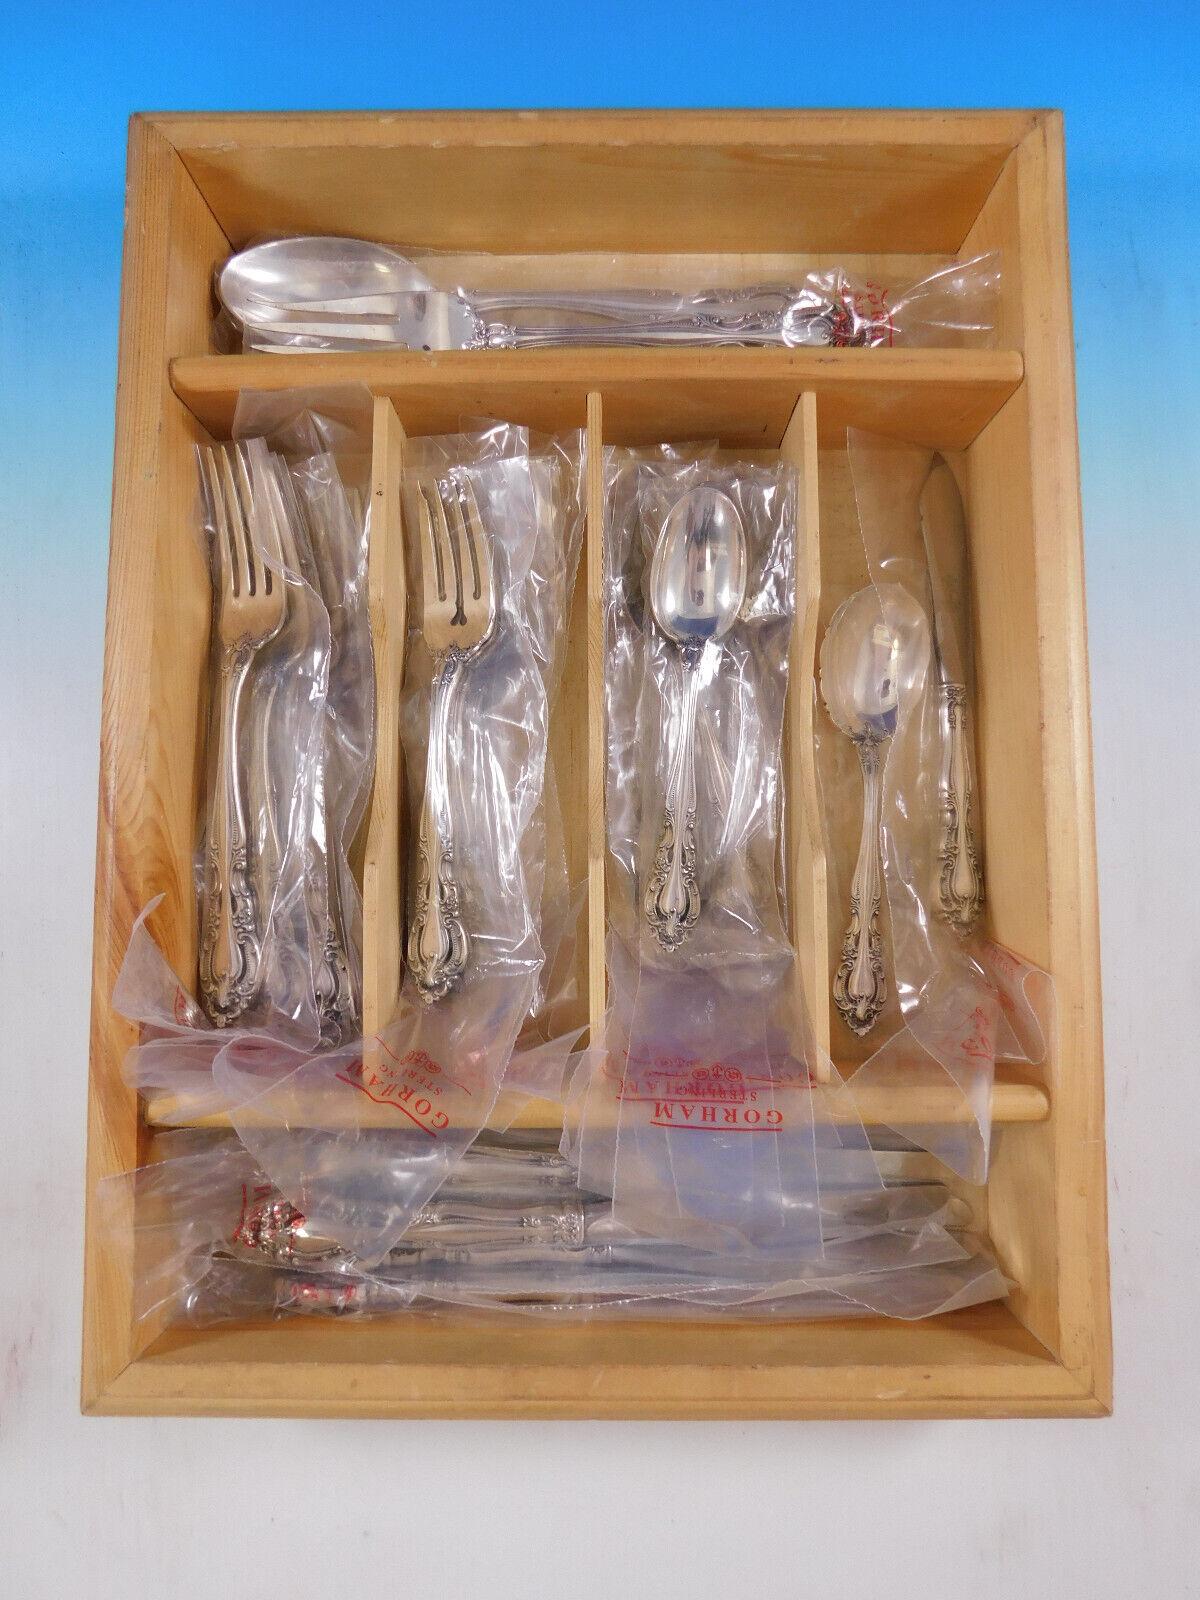 Unused Baronial New by Gorham, c1973, sterling silver flatware set - 28 pieces. The handles of the forks and spoons are pierced. This set includes:

6 place knives, 9 1/4